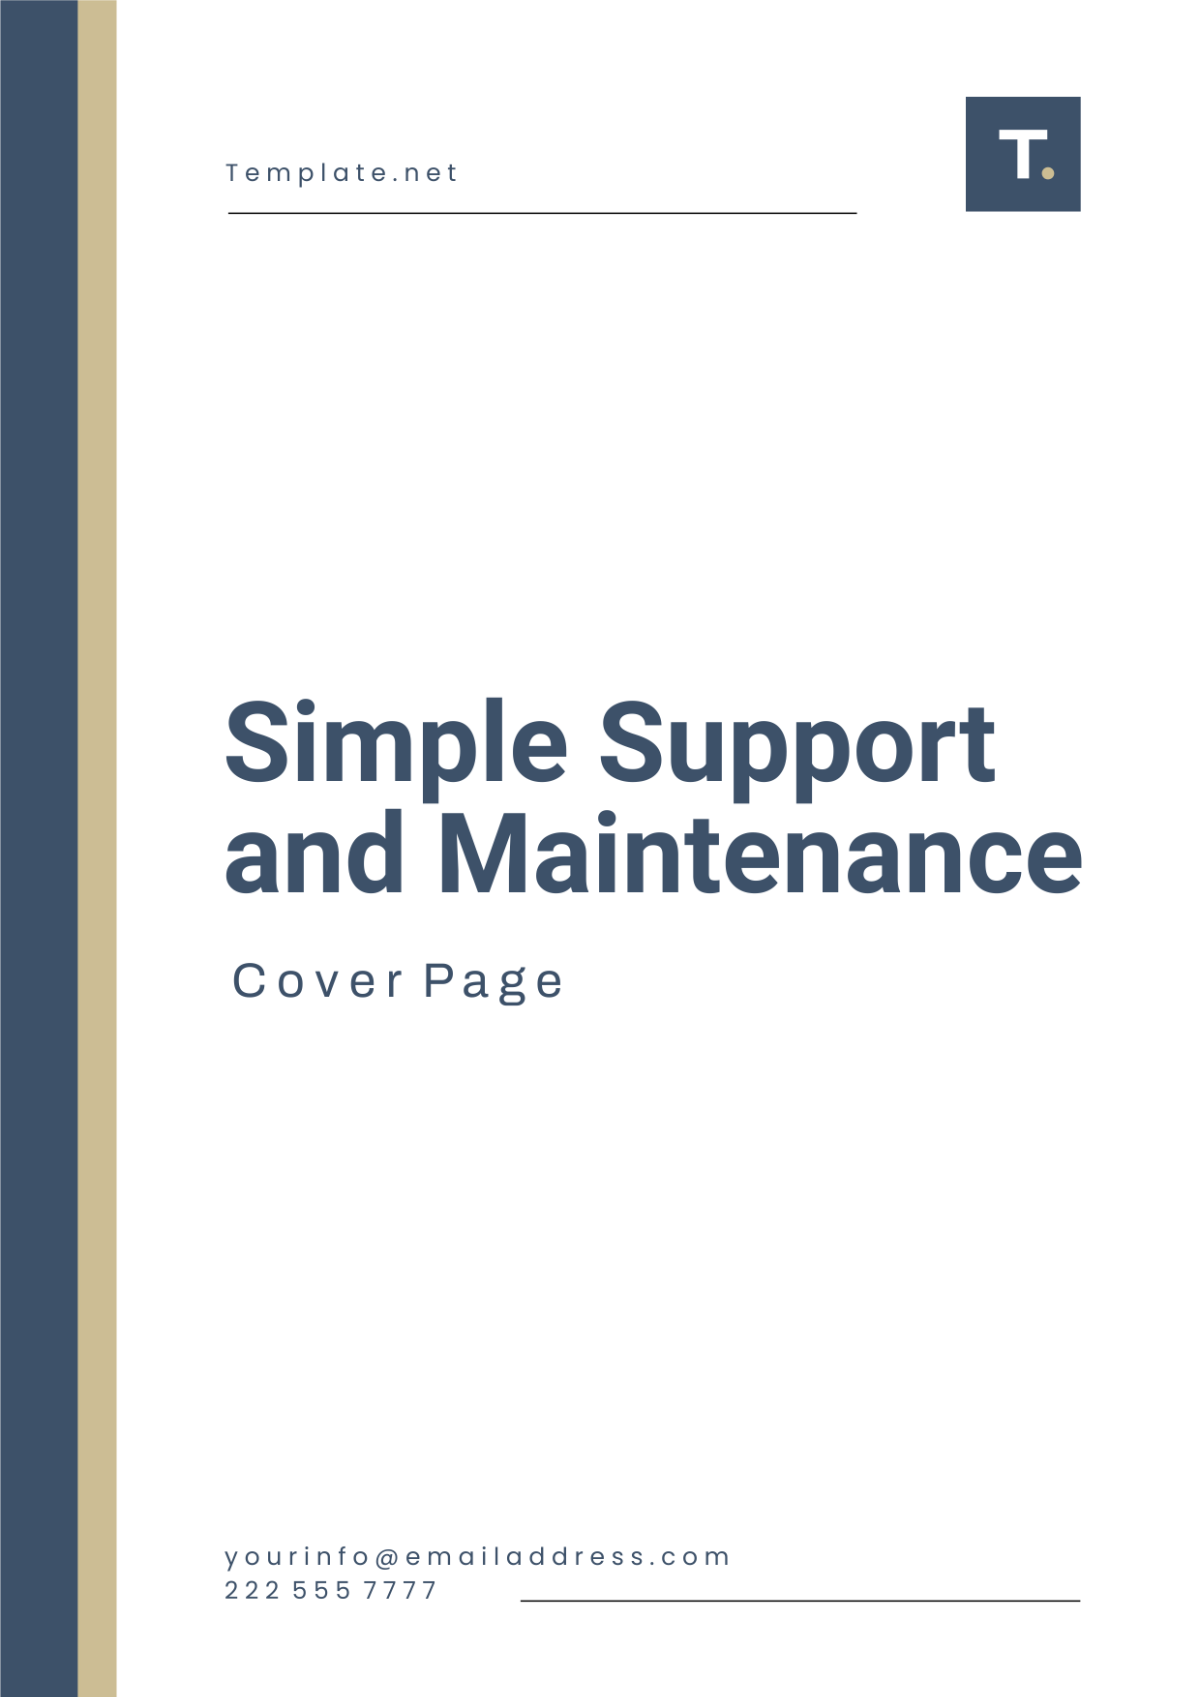 Simple Support and Maintenance Cover Page Template